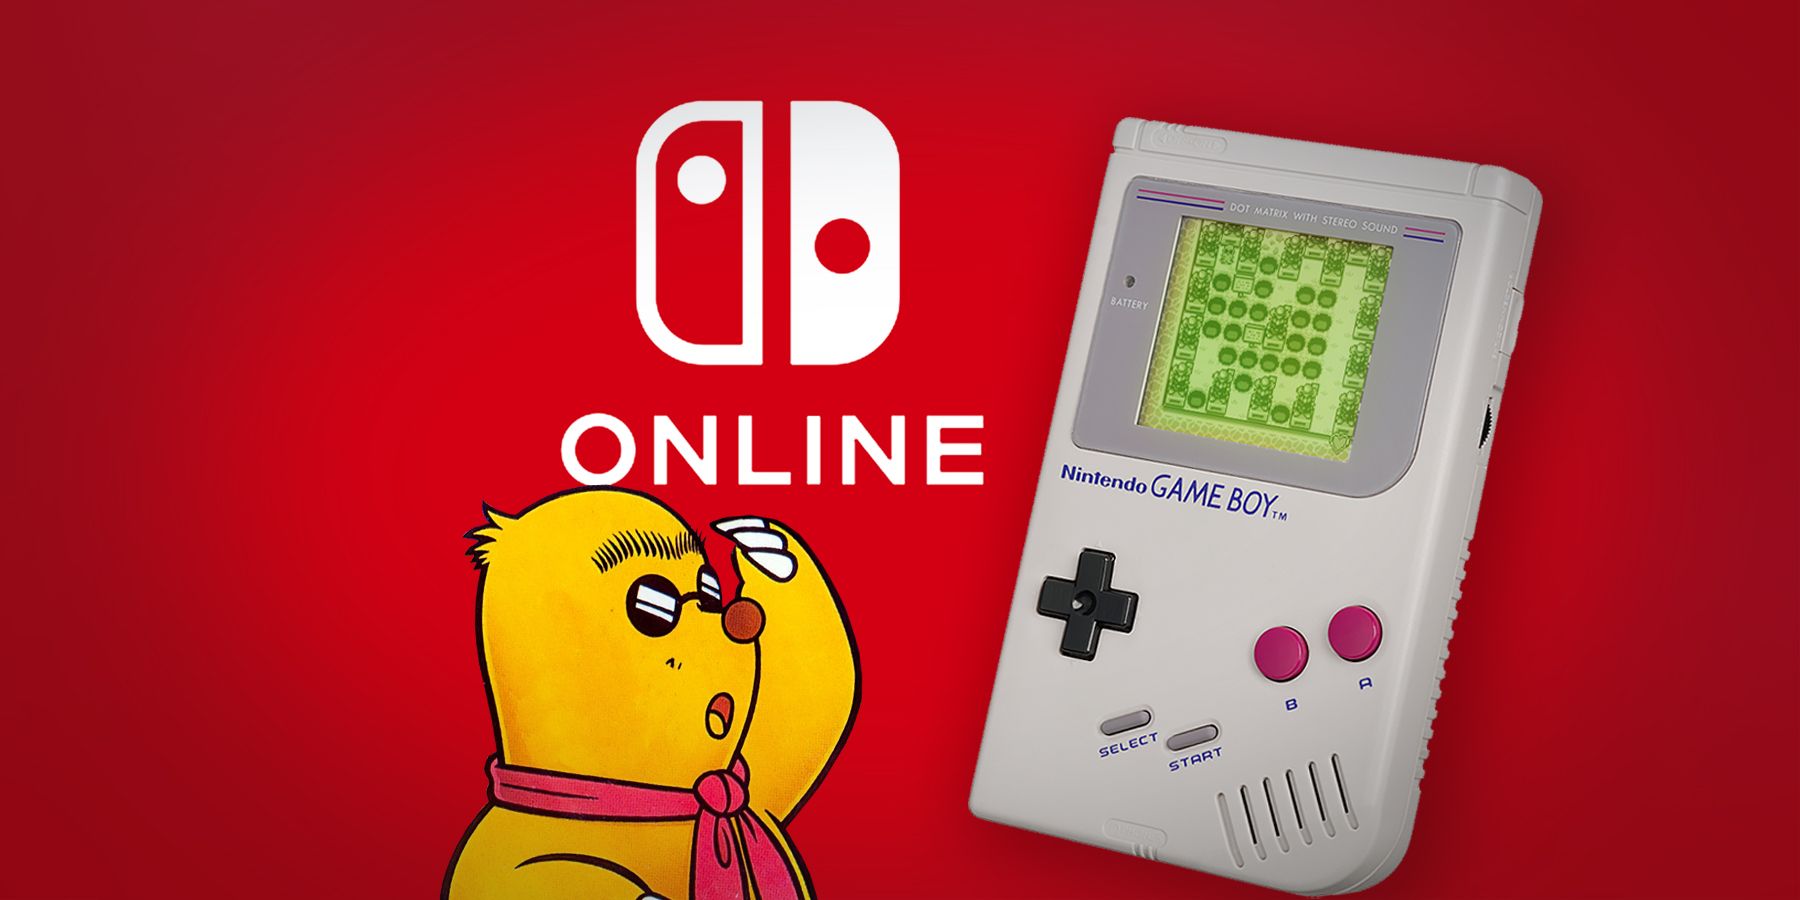 Obscure Nintendo Game Boy titles that may come to Nintendo Switch Online.